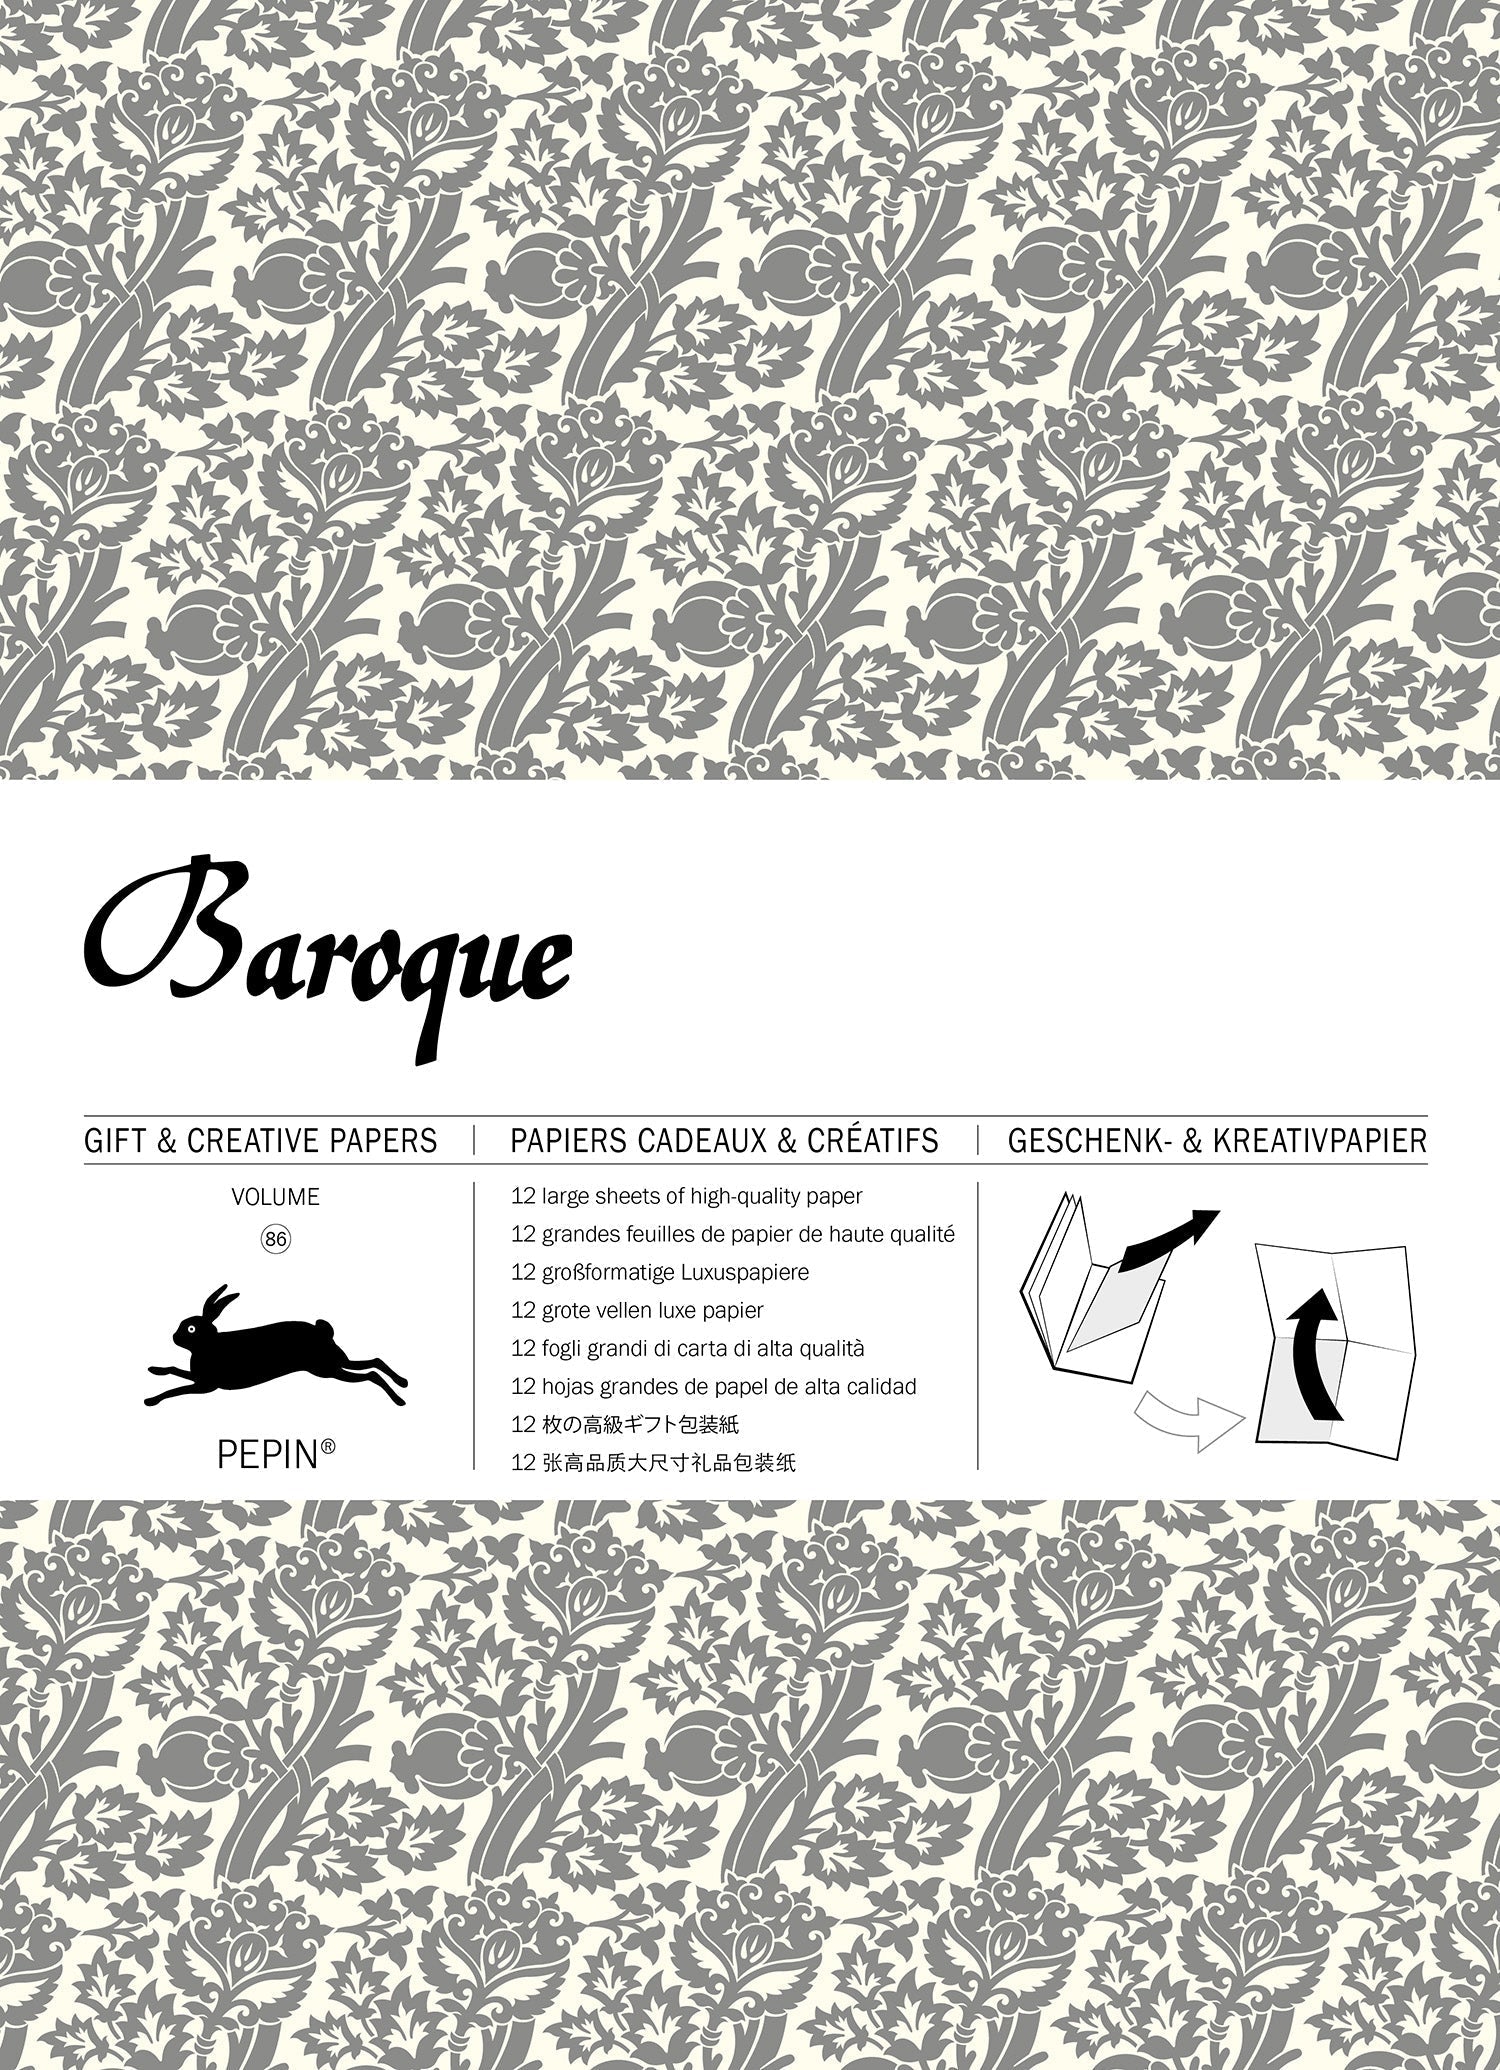 Gift & creative papers - Baroque